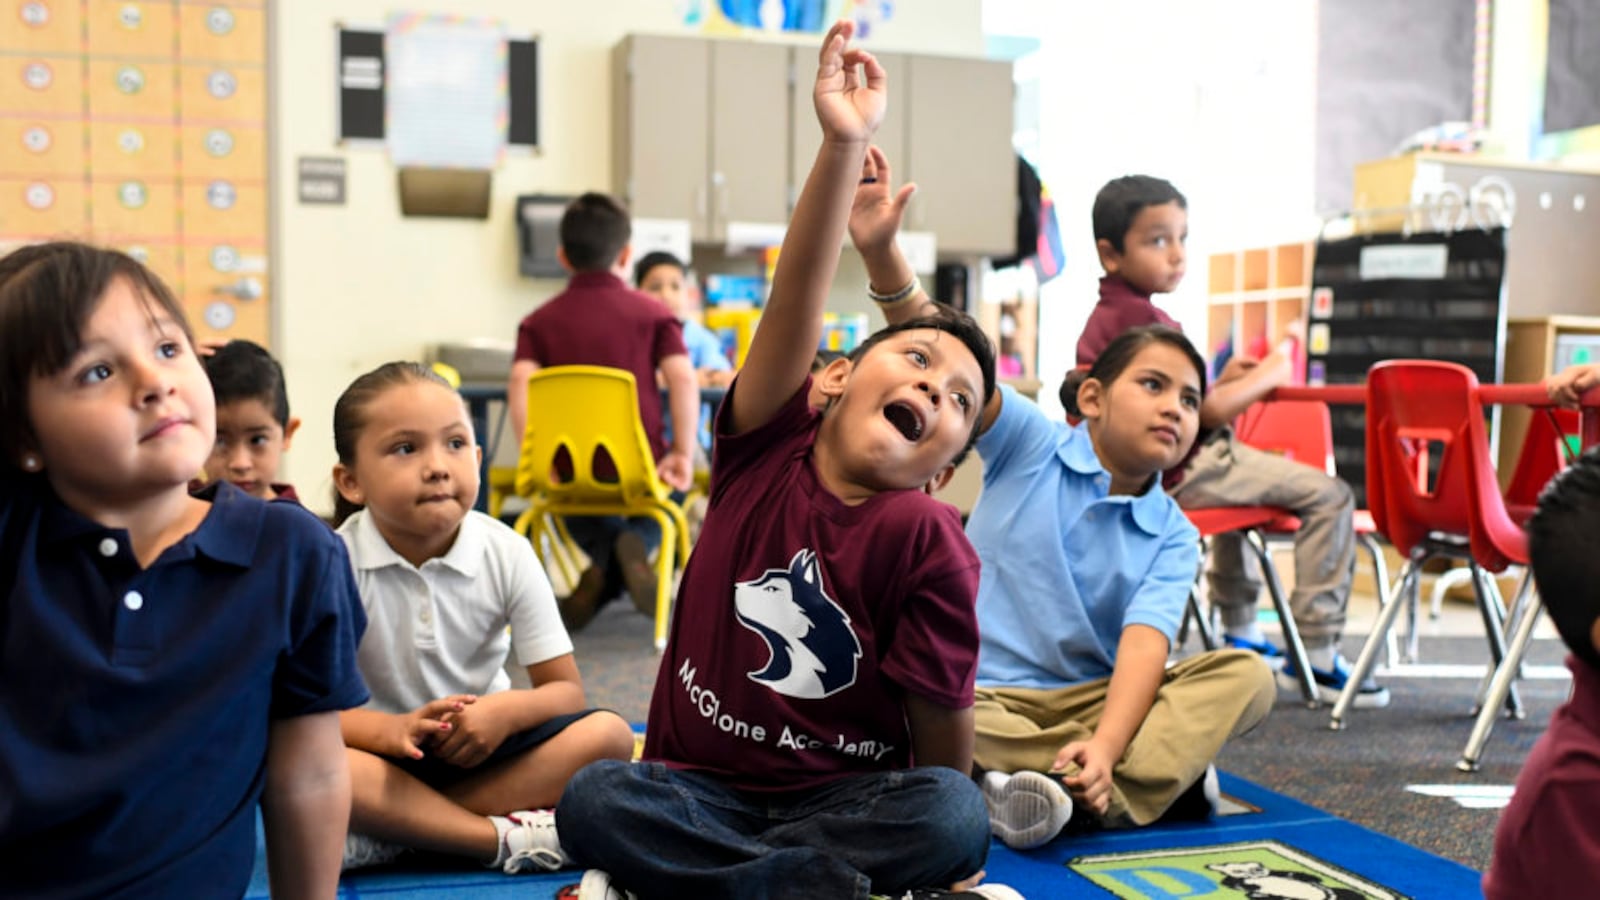 Ismael Mora raises his hand on the first day of school at McGlone Academy in Denver on Aug. 15, 2018.